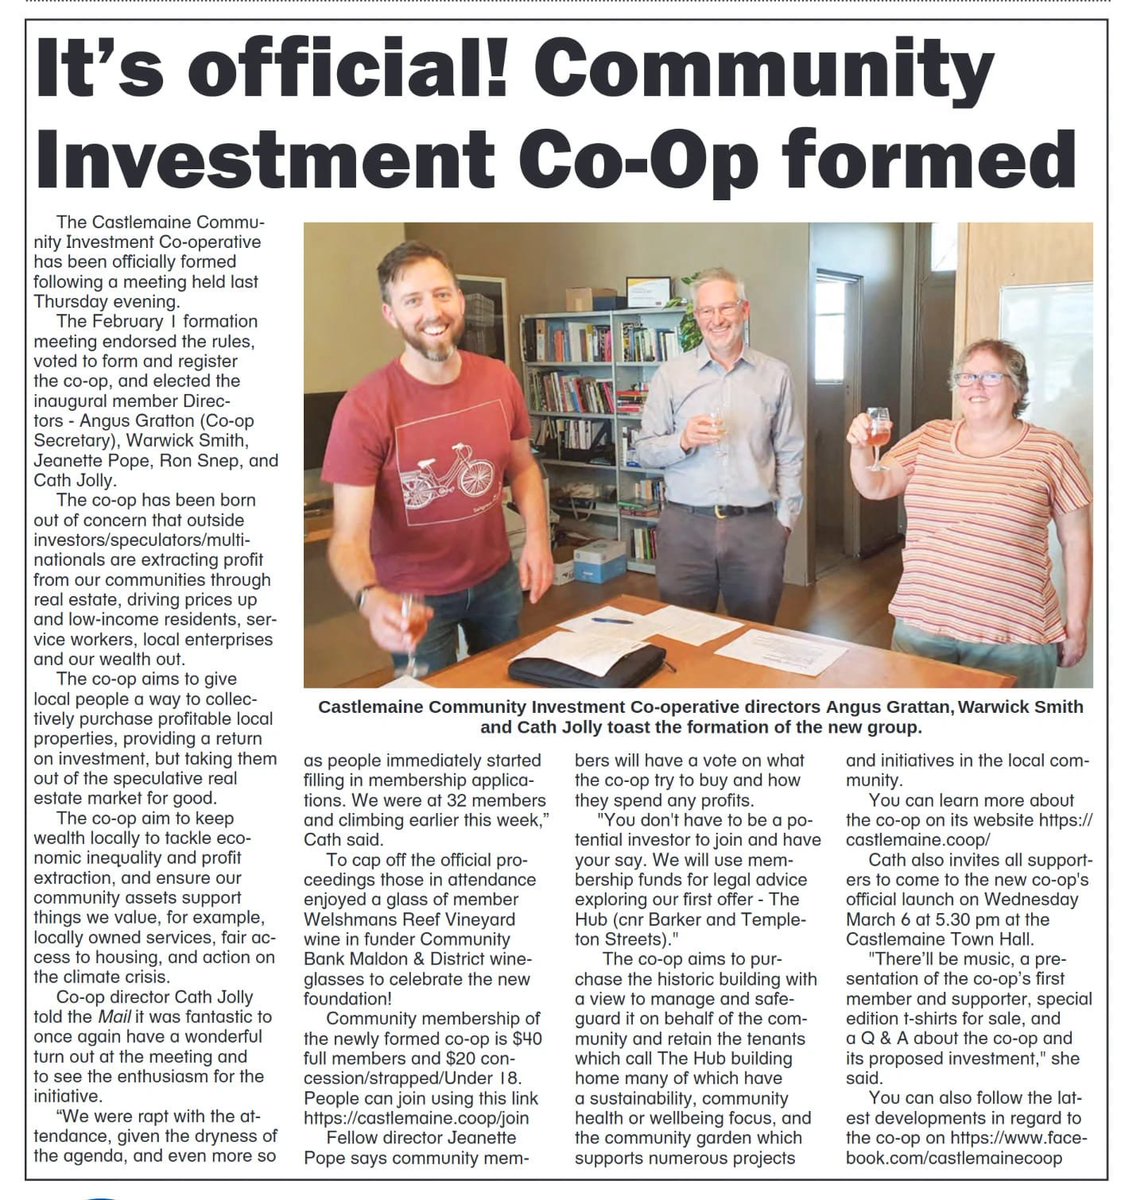 Our local community investment #cooperative is now a legal entity and taking memberships. We're also having a proper launch on March 6 in the Castlemaine Town Hall. Locals can join now at castlemaine.coop/join Below article from the @CastlemaineMail